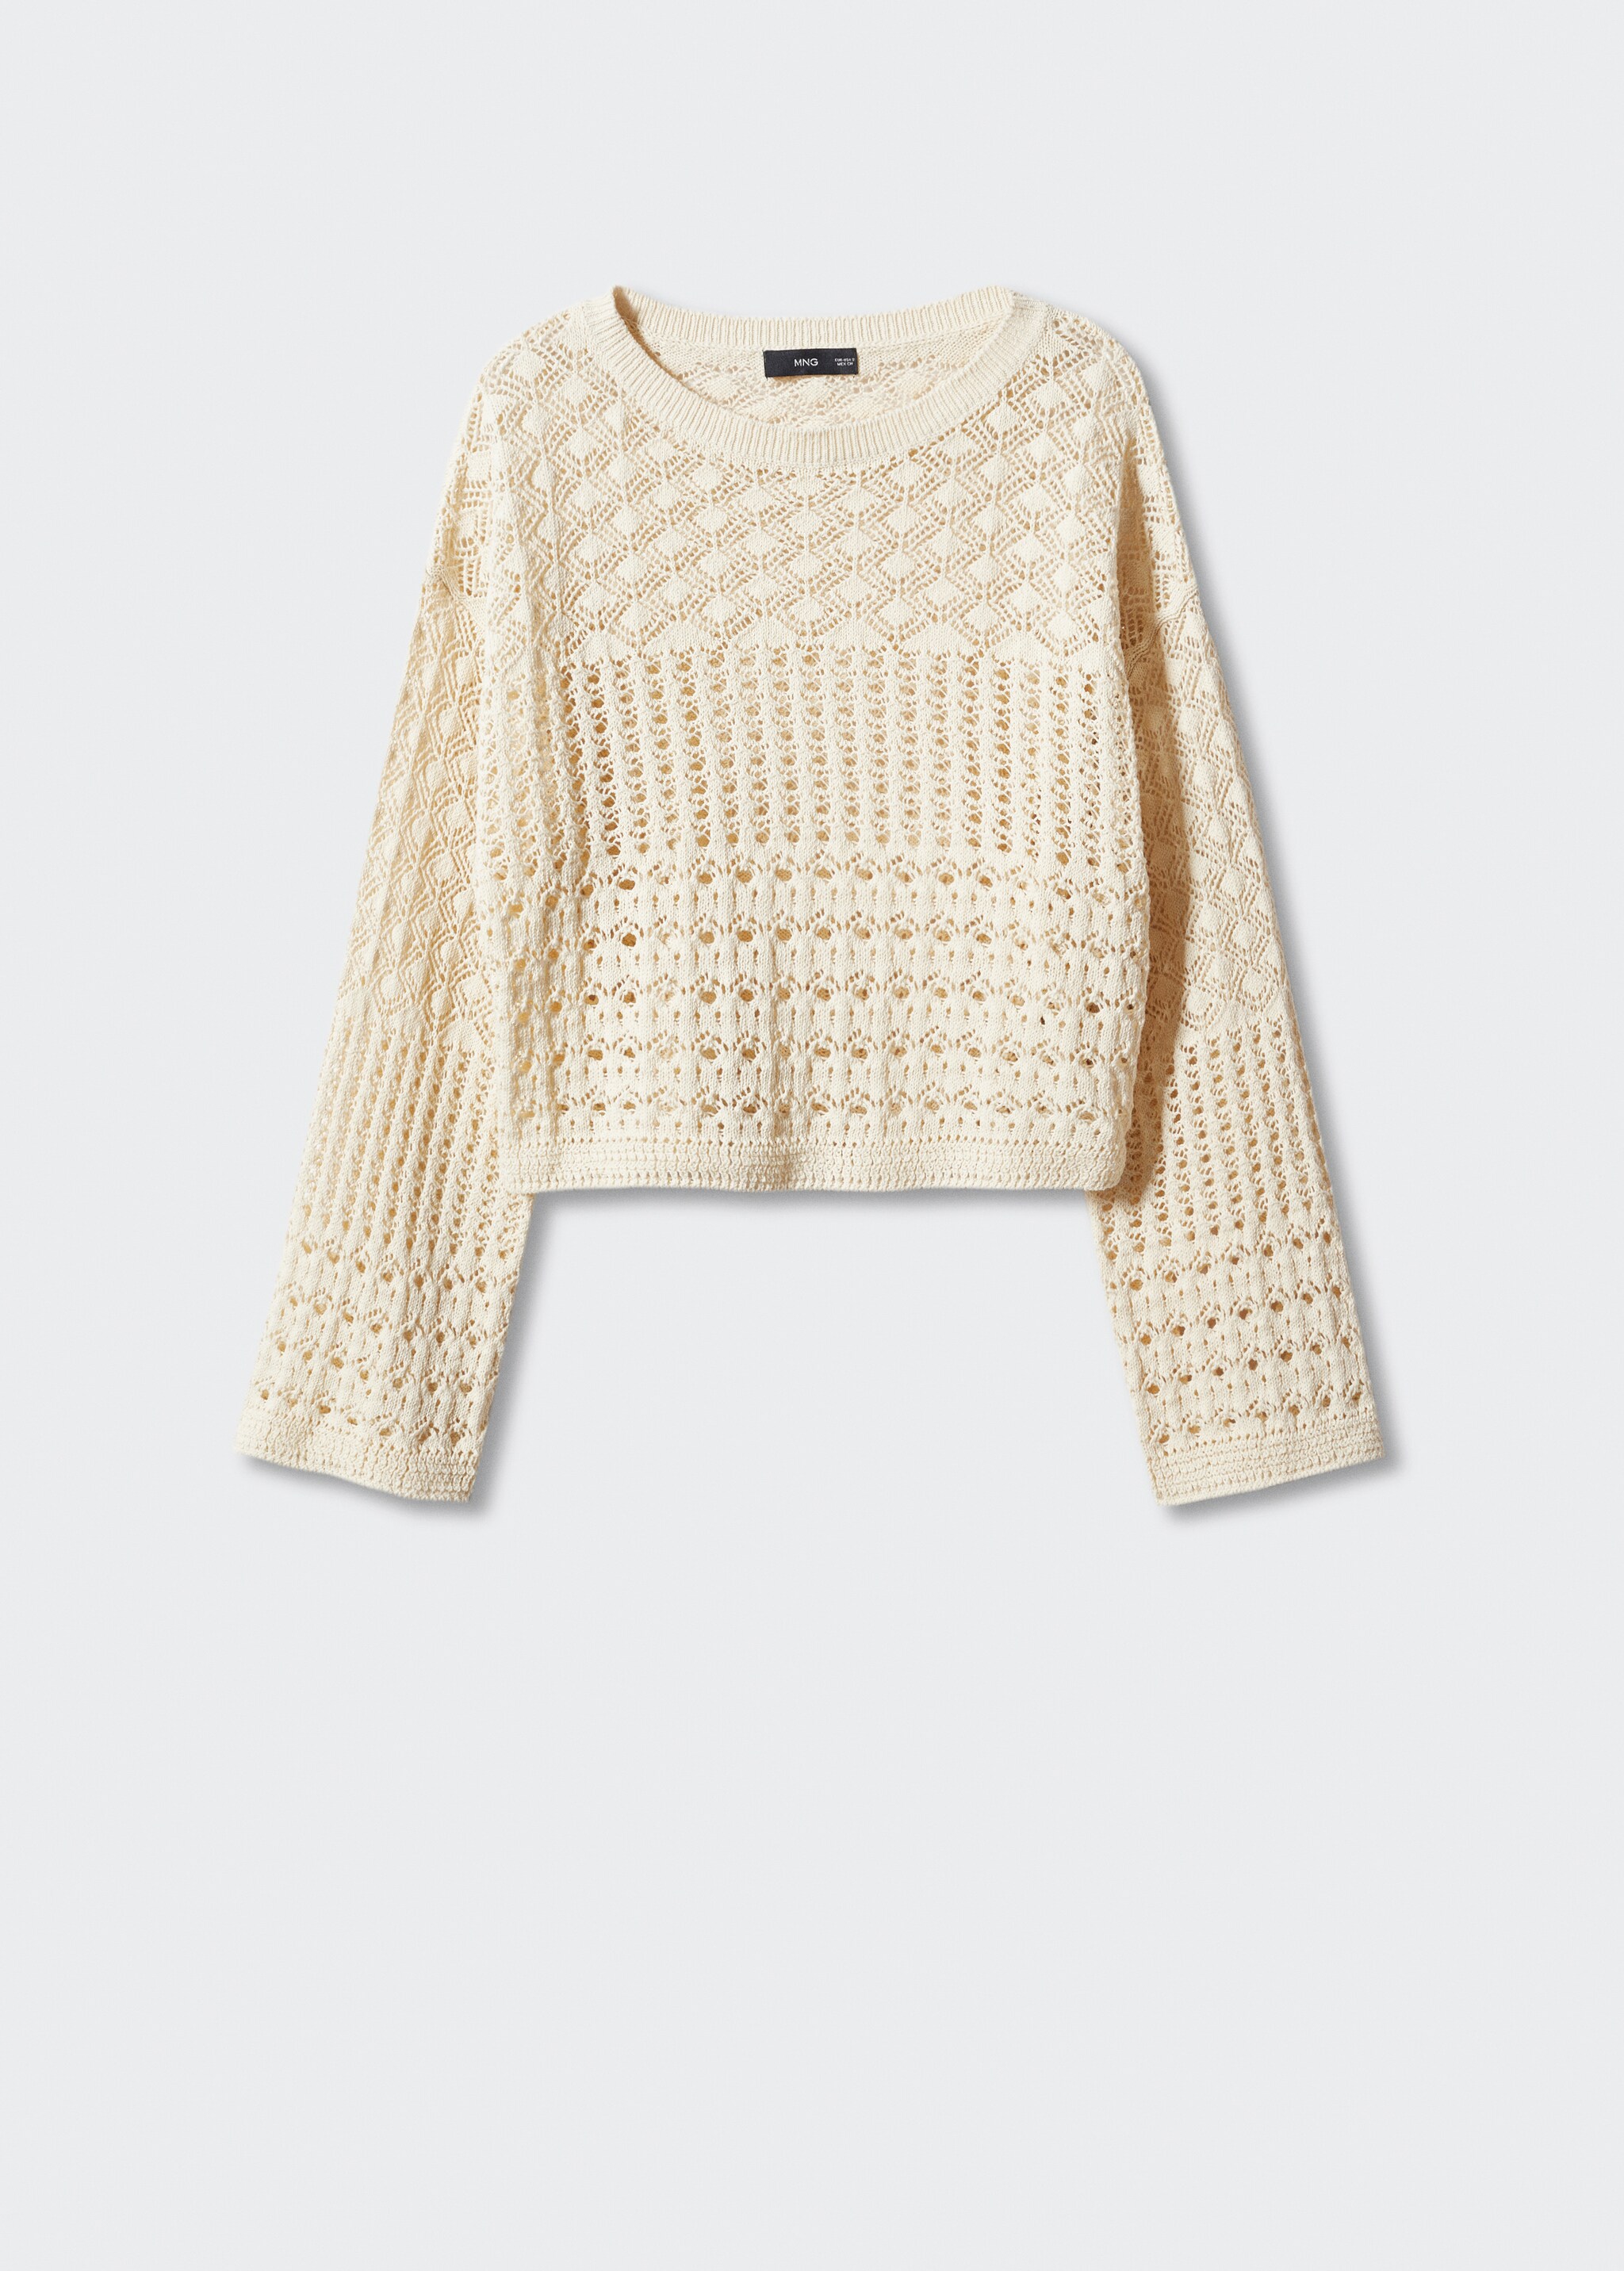 Openwork panel sweater - Article without model